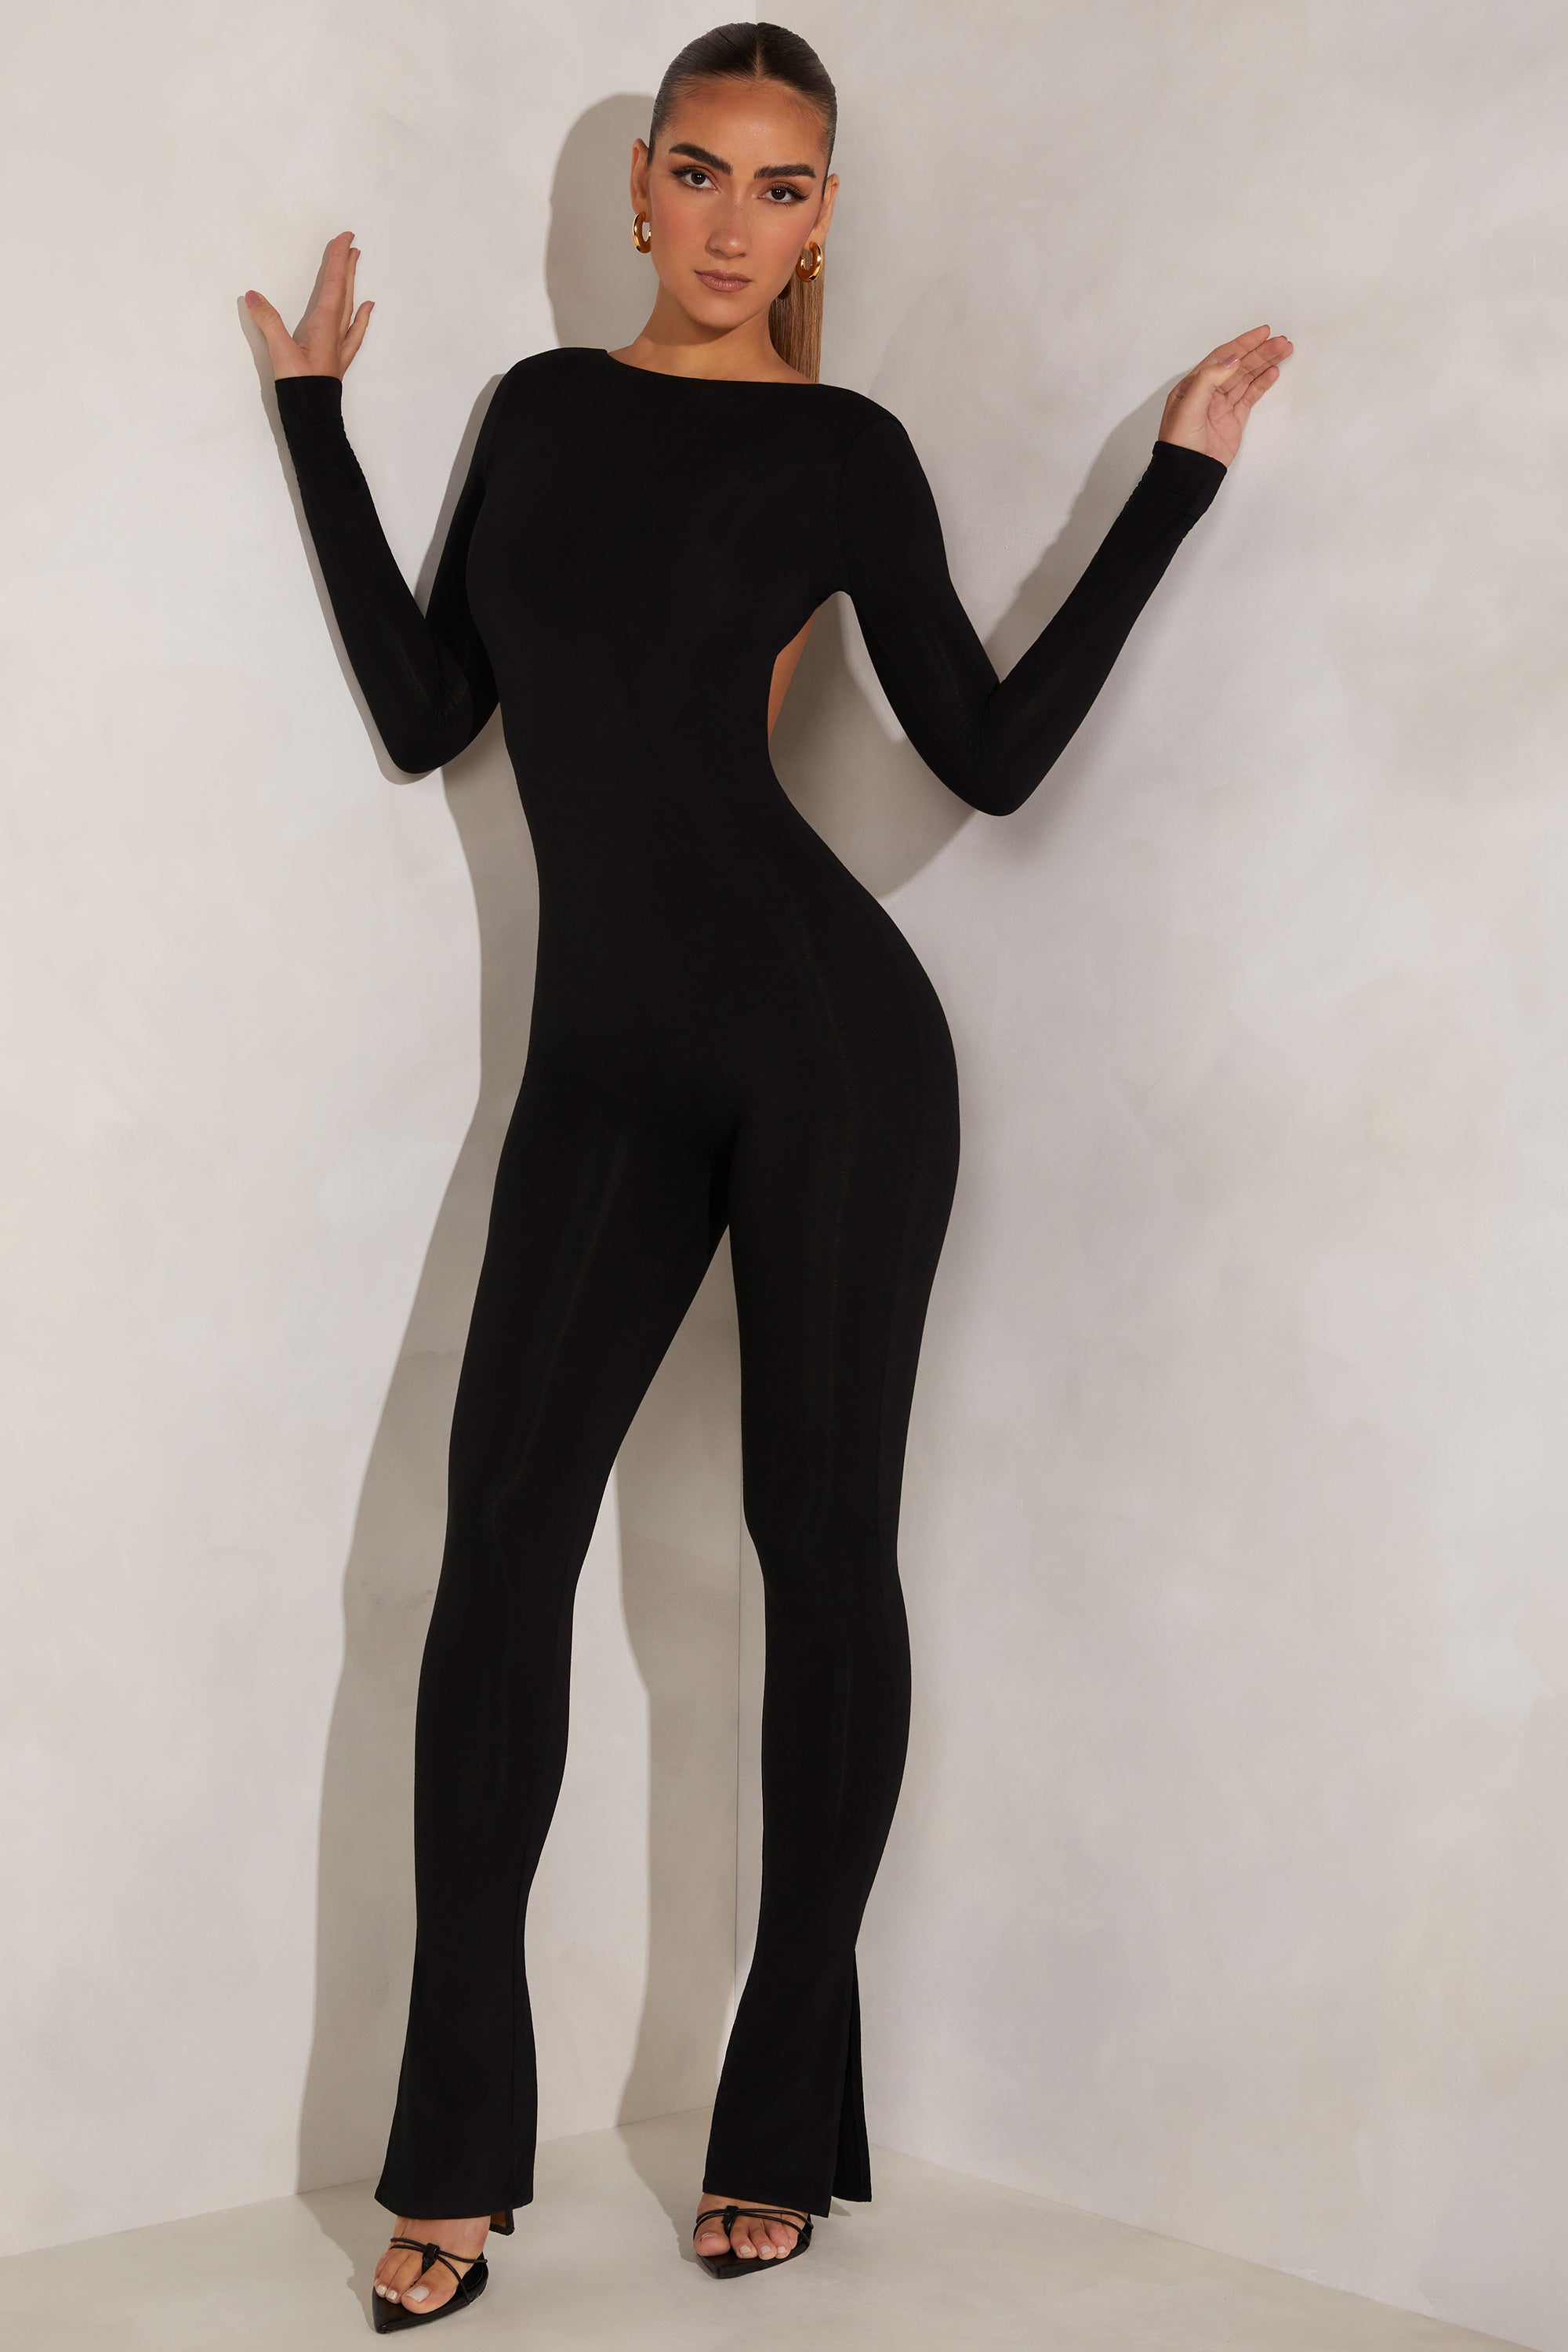 herlipto Roches Open Back Jumpsuit | camillevieraservices.com